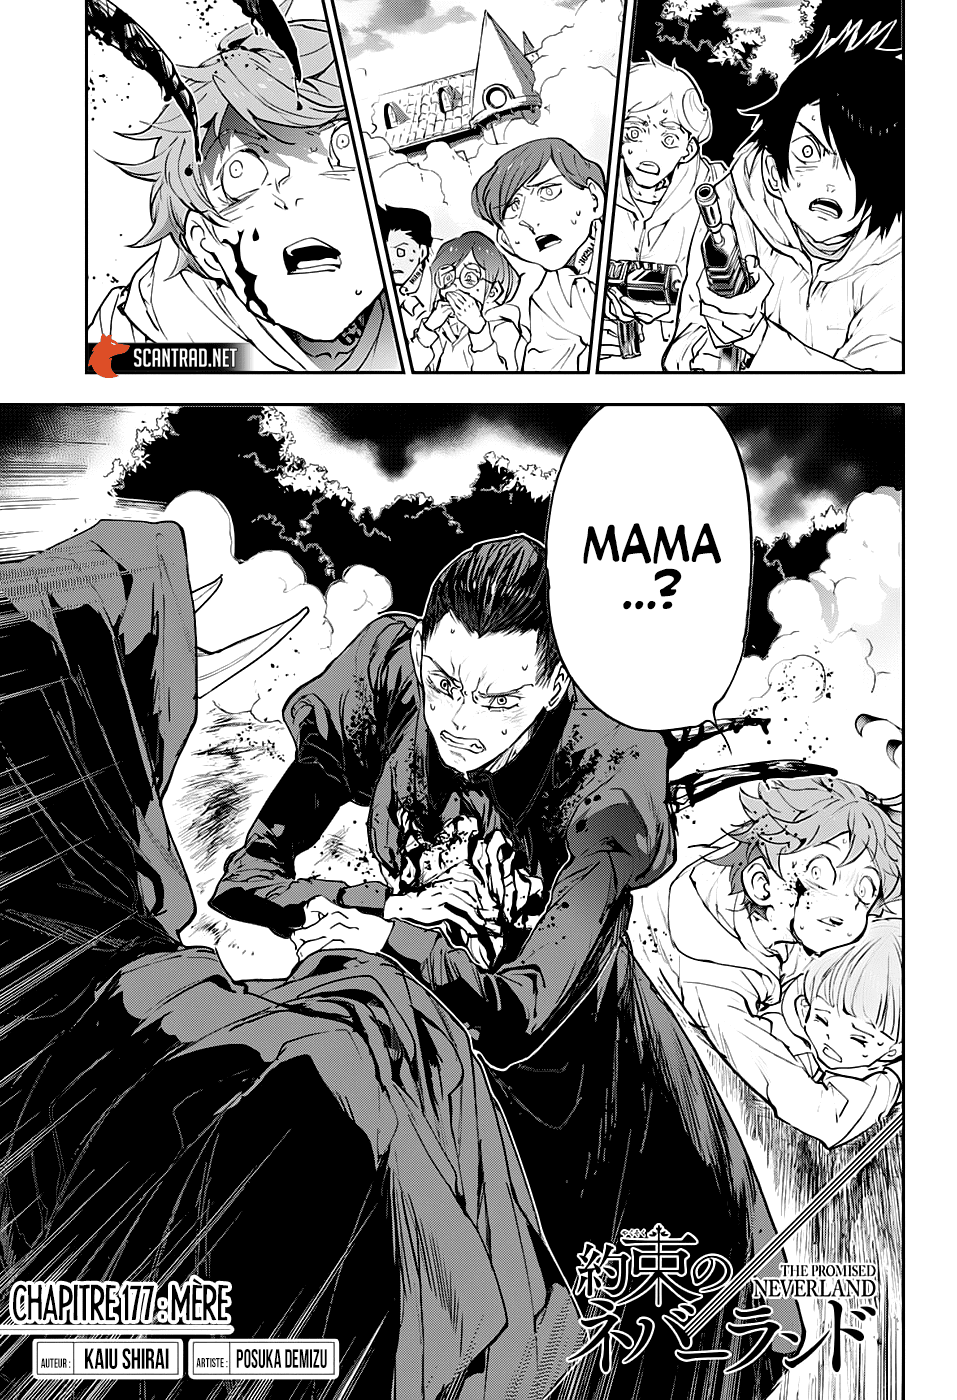 The Promised Neverland: Chapter chapitre-177 - Page 1